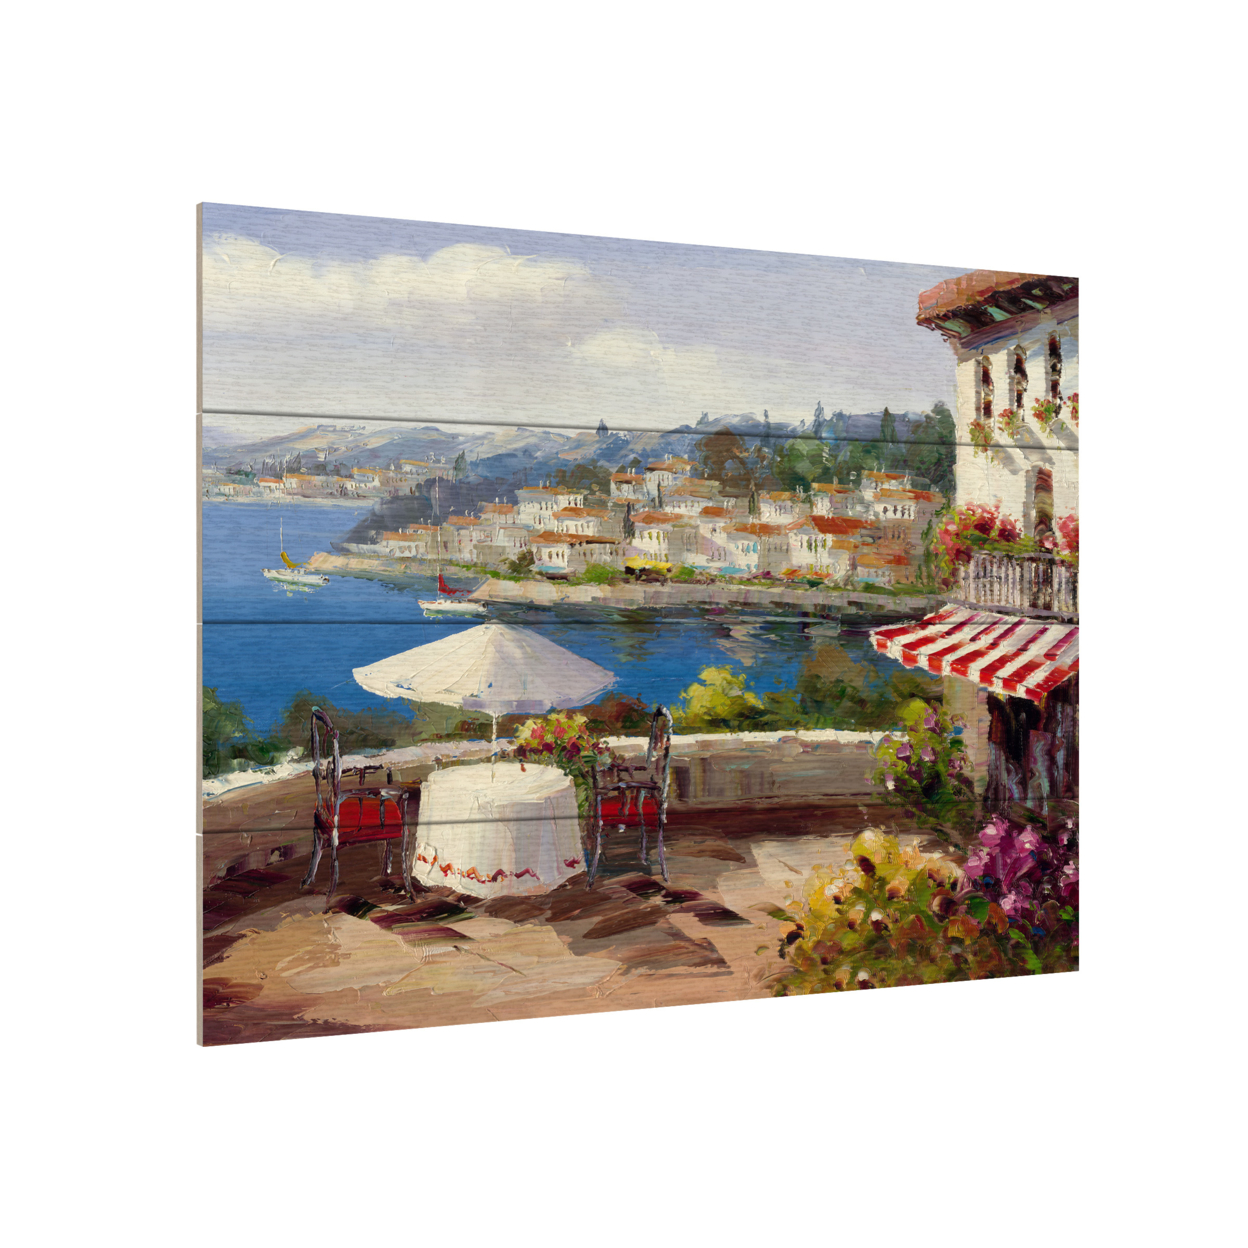 Wall Art 12 X 16 Inches Titled Italian Afternoon Ready To Hang Printed On Wooden Planks